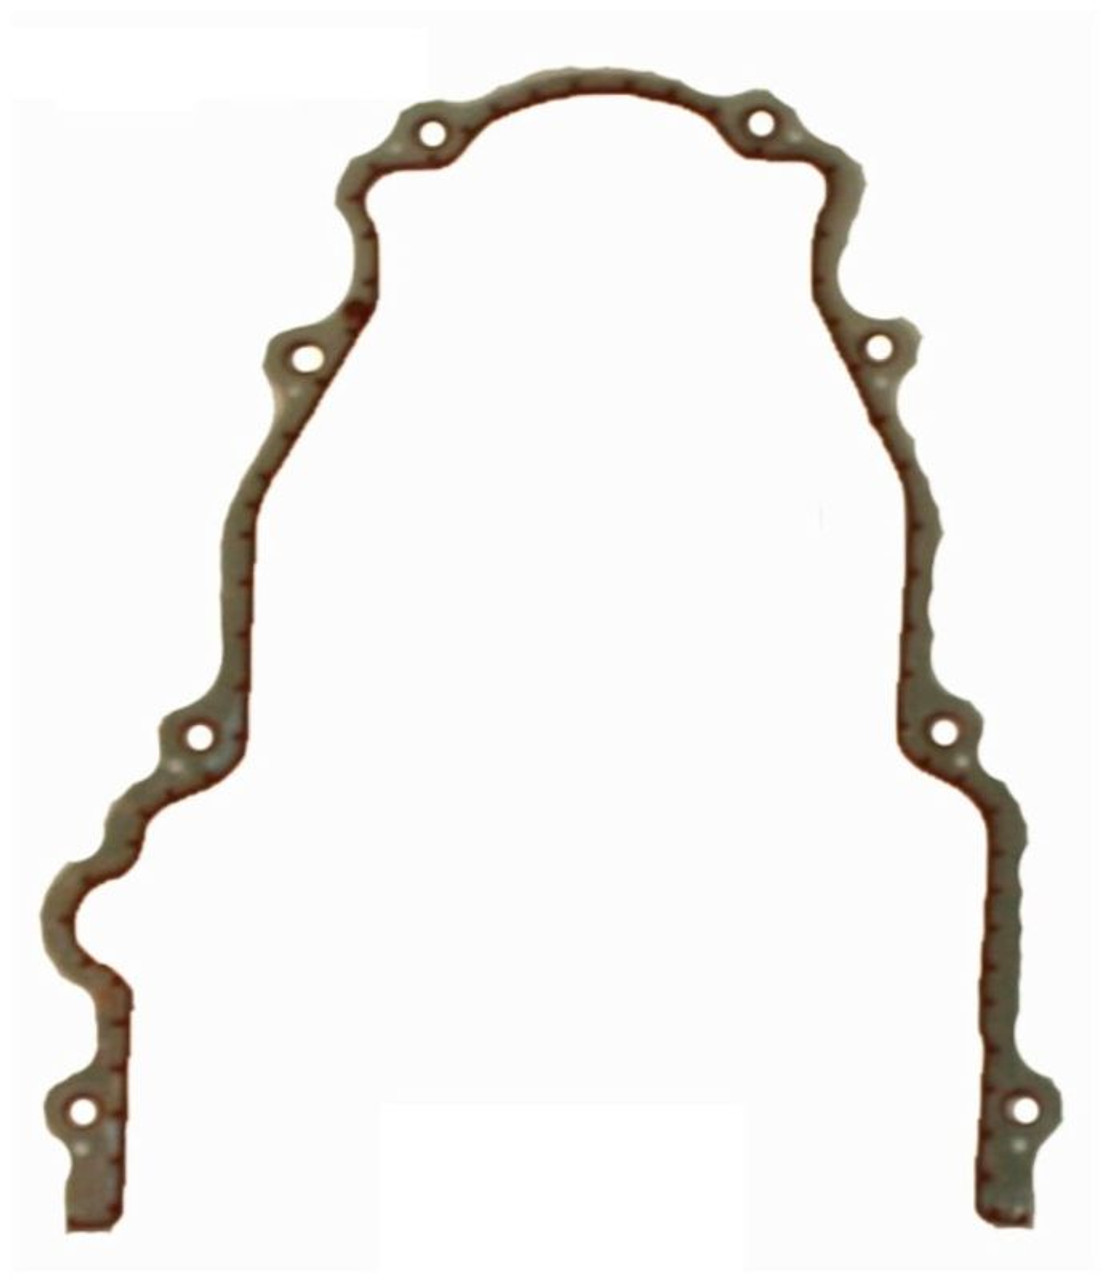 2009 Hummer H3T 5.3L Engine Timing Cover Gasket TCG293-A -624